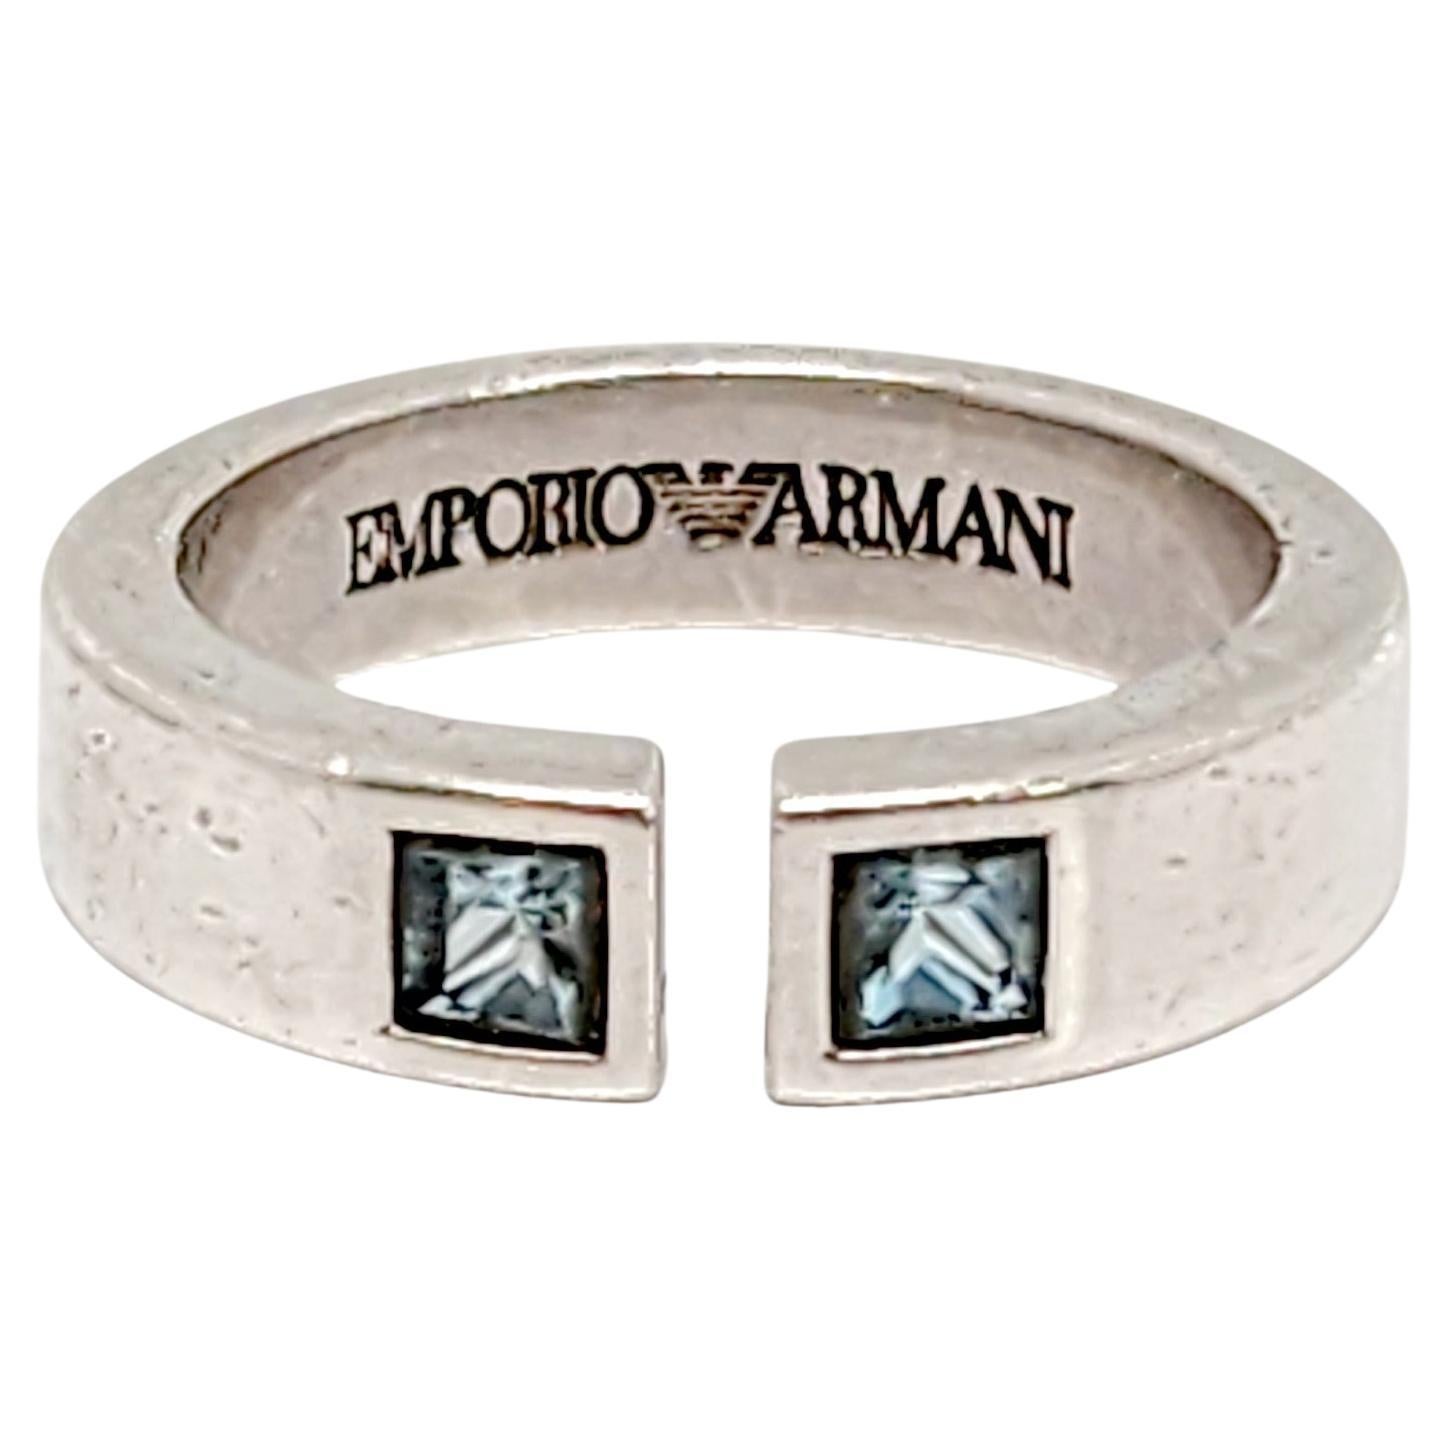 Emporio Armani Sterling Silver Blue Stone Band Ring Size 6.75 #14782 For Sale